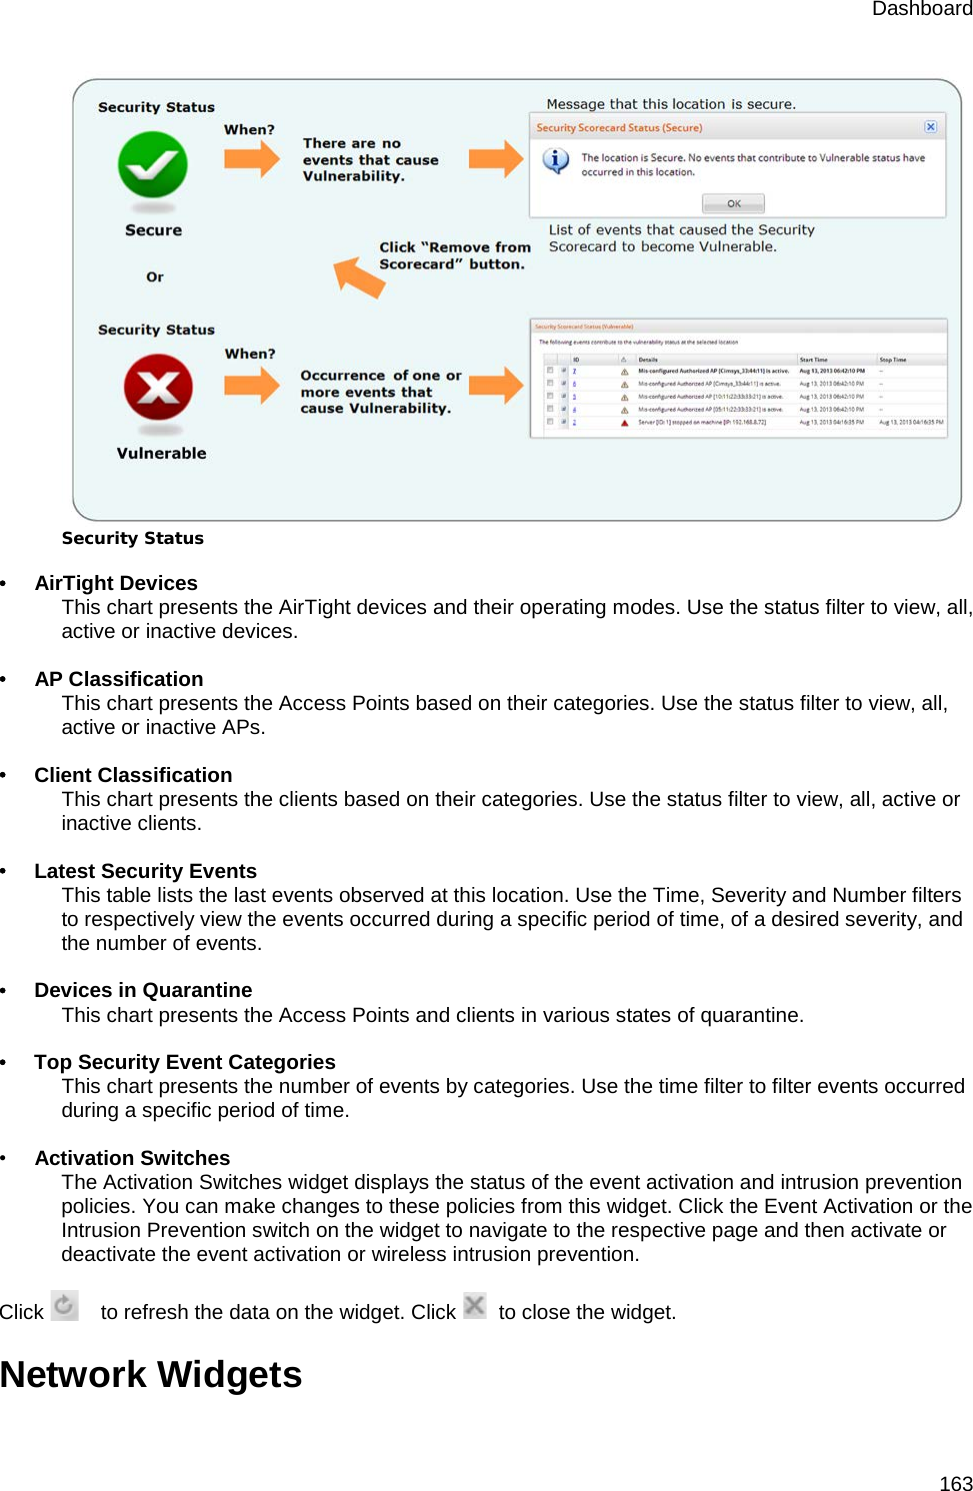 Dashboard 163  Security Status   •        AirTight Devices  This chart presents the AirTight devices and their operating modes. Use the status filter to view, all, active or inactive devices.   •        AP Classification  This chart presents the Access Points based on their categories. Use the status filter to view, all, active or inactive APs.    •        Client Classification This chart presents the clients based on their categories. Use the status filter to view, all, active or inactive clients.    •        Latest Security Events  This table lists the last events observed at this location. Use the Time, Severity and Number filters to respectively view the events occurred during a specific period of time, of a desired severity, and the number of events.    •        Devices in Quarantine This chart presents the Access Points and clients in various states of quarantine.   •        Top Security Event Categories  This chart presents the number of events by categories. Use the time filter to filter events occurred during a specific period of time.   •        Activation Switches The Activation Switches widget displays the status of the event activation and intrusion prevention policies. You can make changes to these policies from this widget. Click the Event Activation or the Intrusion Prevention switch on the widget to navigate to the respective page and then activate or deactivate the event activation or wireless intrusion prevention.   Click      to refresh the data on the widget. Click    to close the widget. Network Widgets 